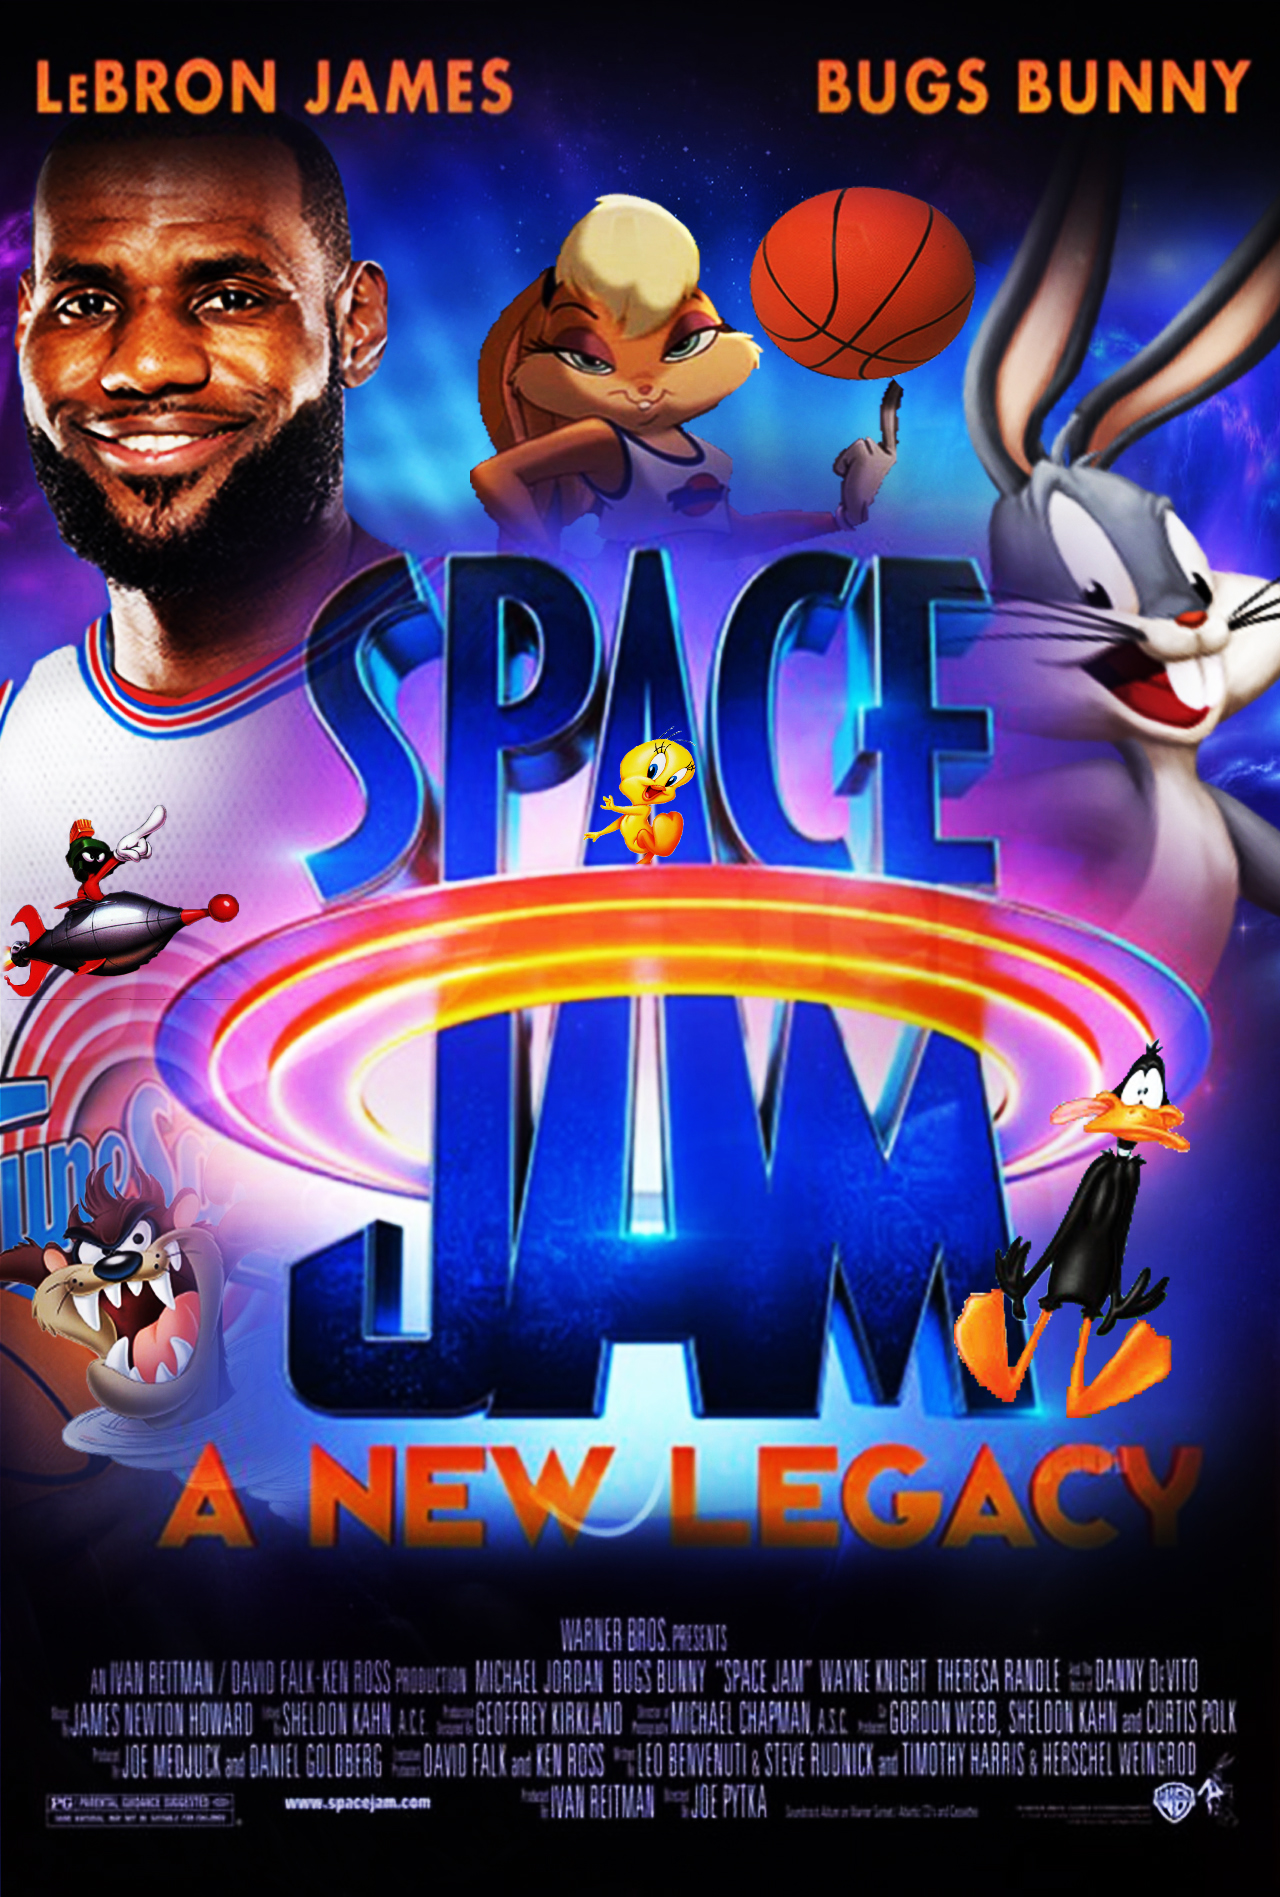 Space Jam: A New Legacy Poster by Thekingblader995 on DeviantArt